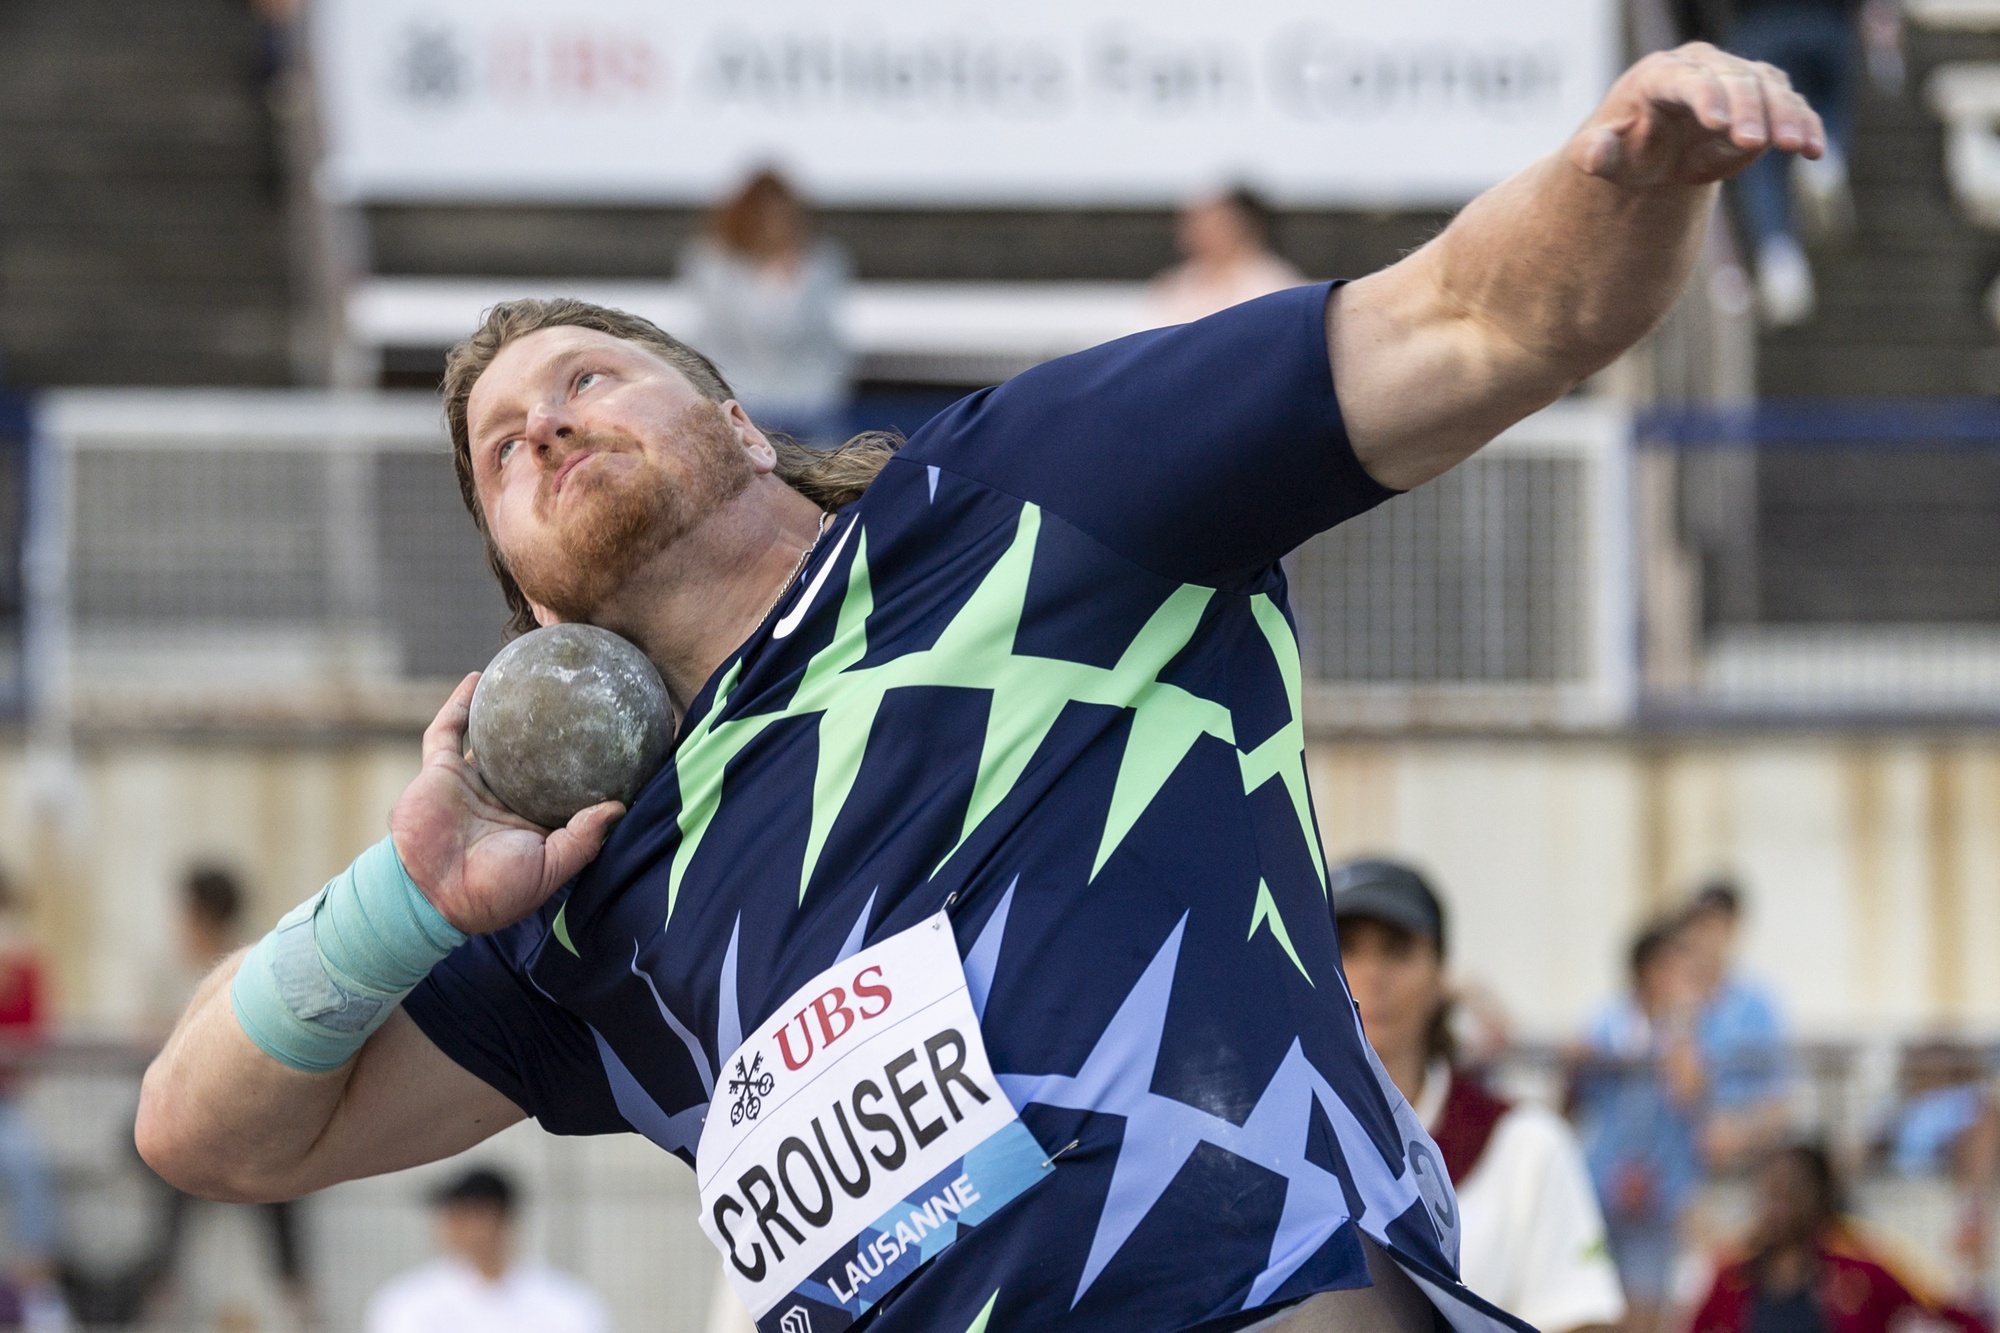 epa09430831 Ryan Crouser of the United States competes in the Shot Put Men at the Athletissima IAAF Diamond League international athletics meeting at the Stade Olympique de la Pontaise in Lausanne, Switzerland, 26 August 2021.  EPA/LAURENT GILLIERON